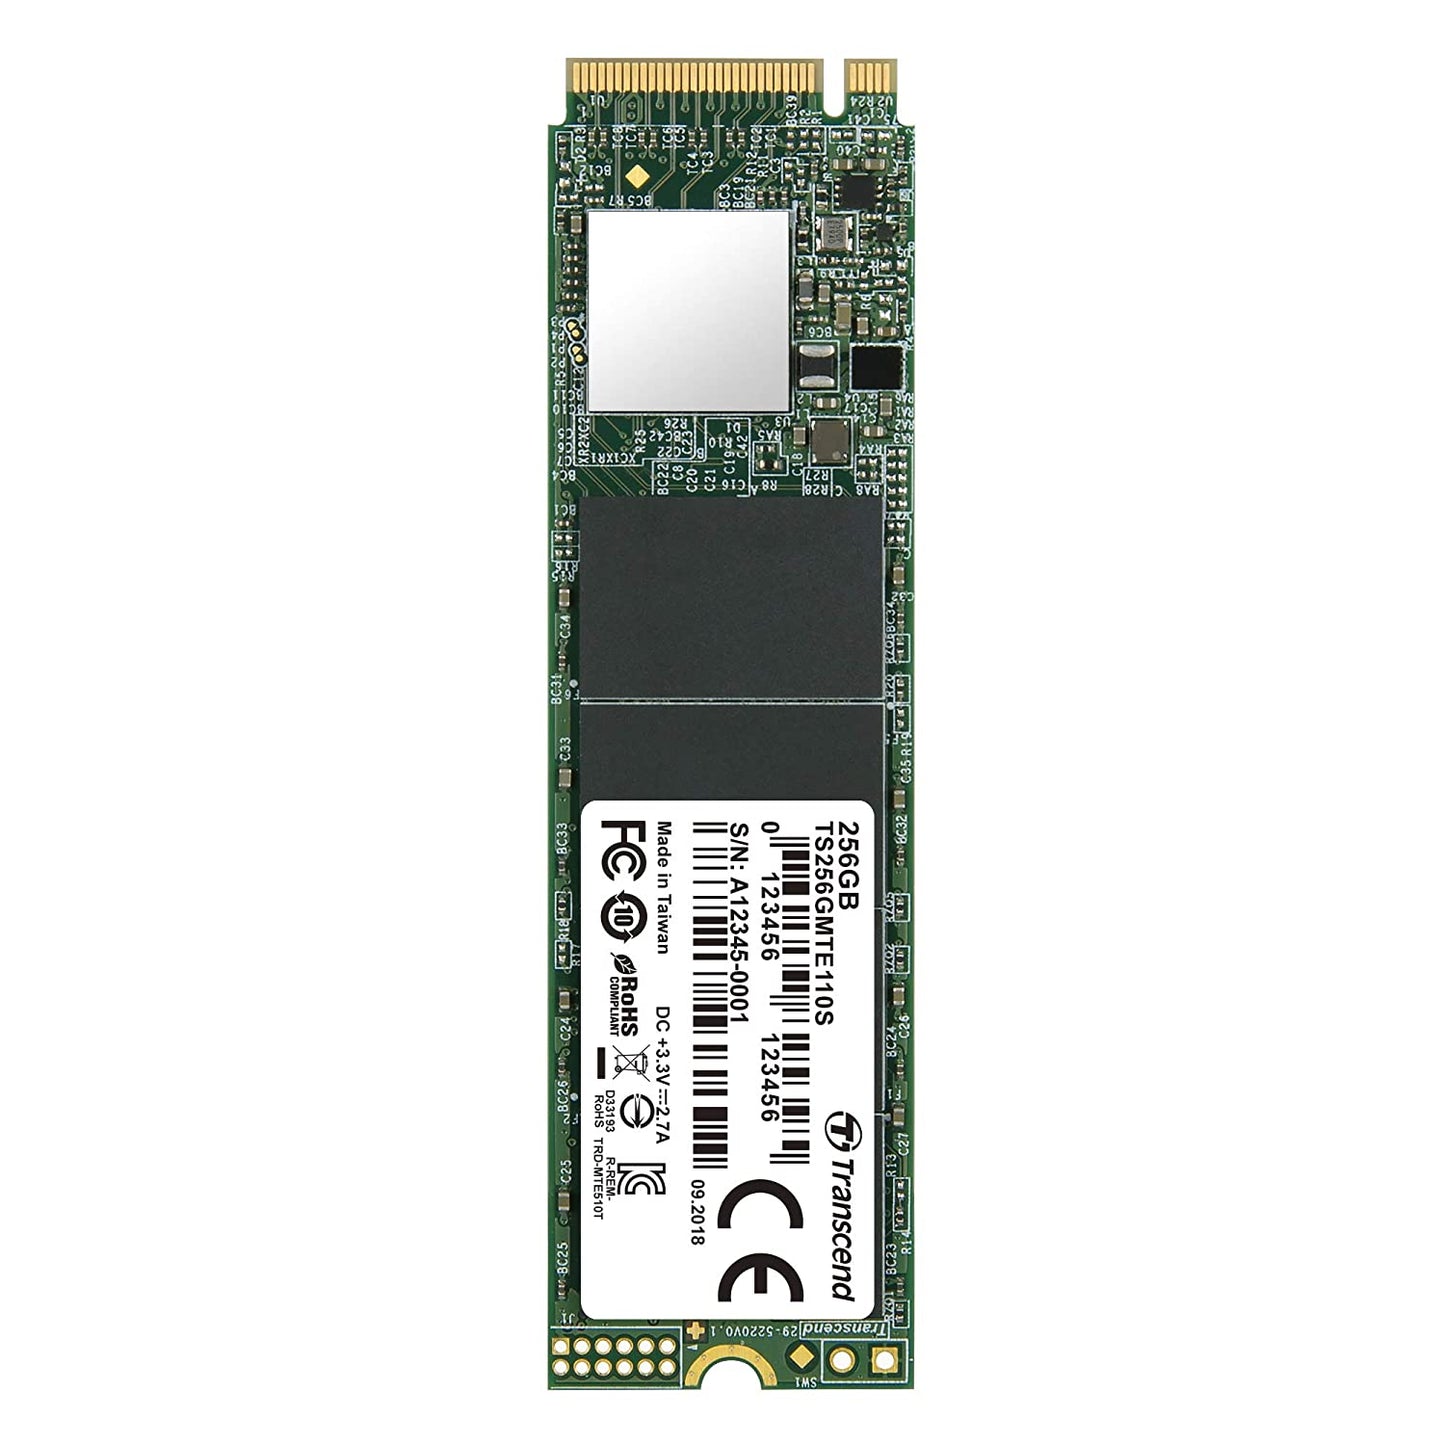 Transcend 256GB NVMe PCIe Gen3 x 4 80 mm m.2 Solid State Drive (TS256GMTE110S)